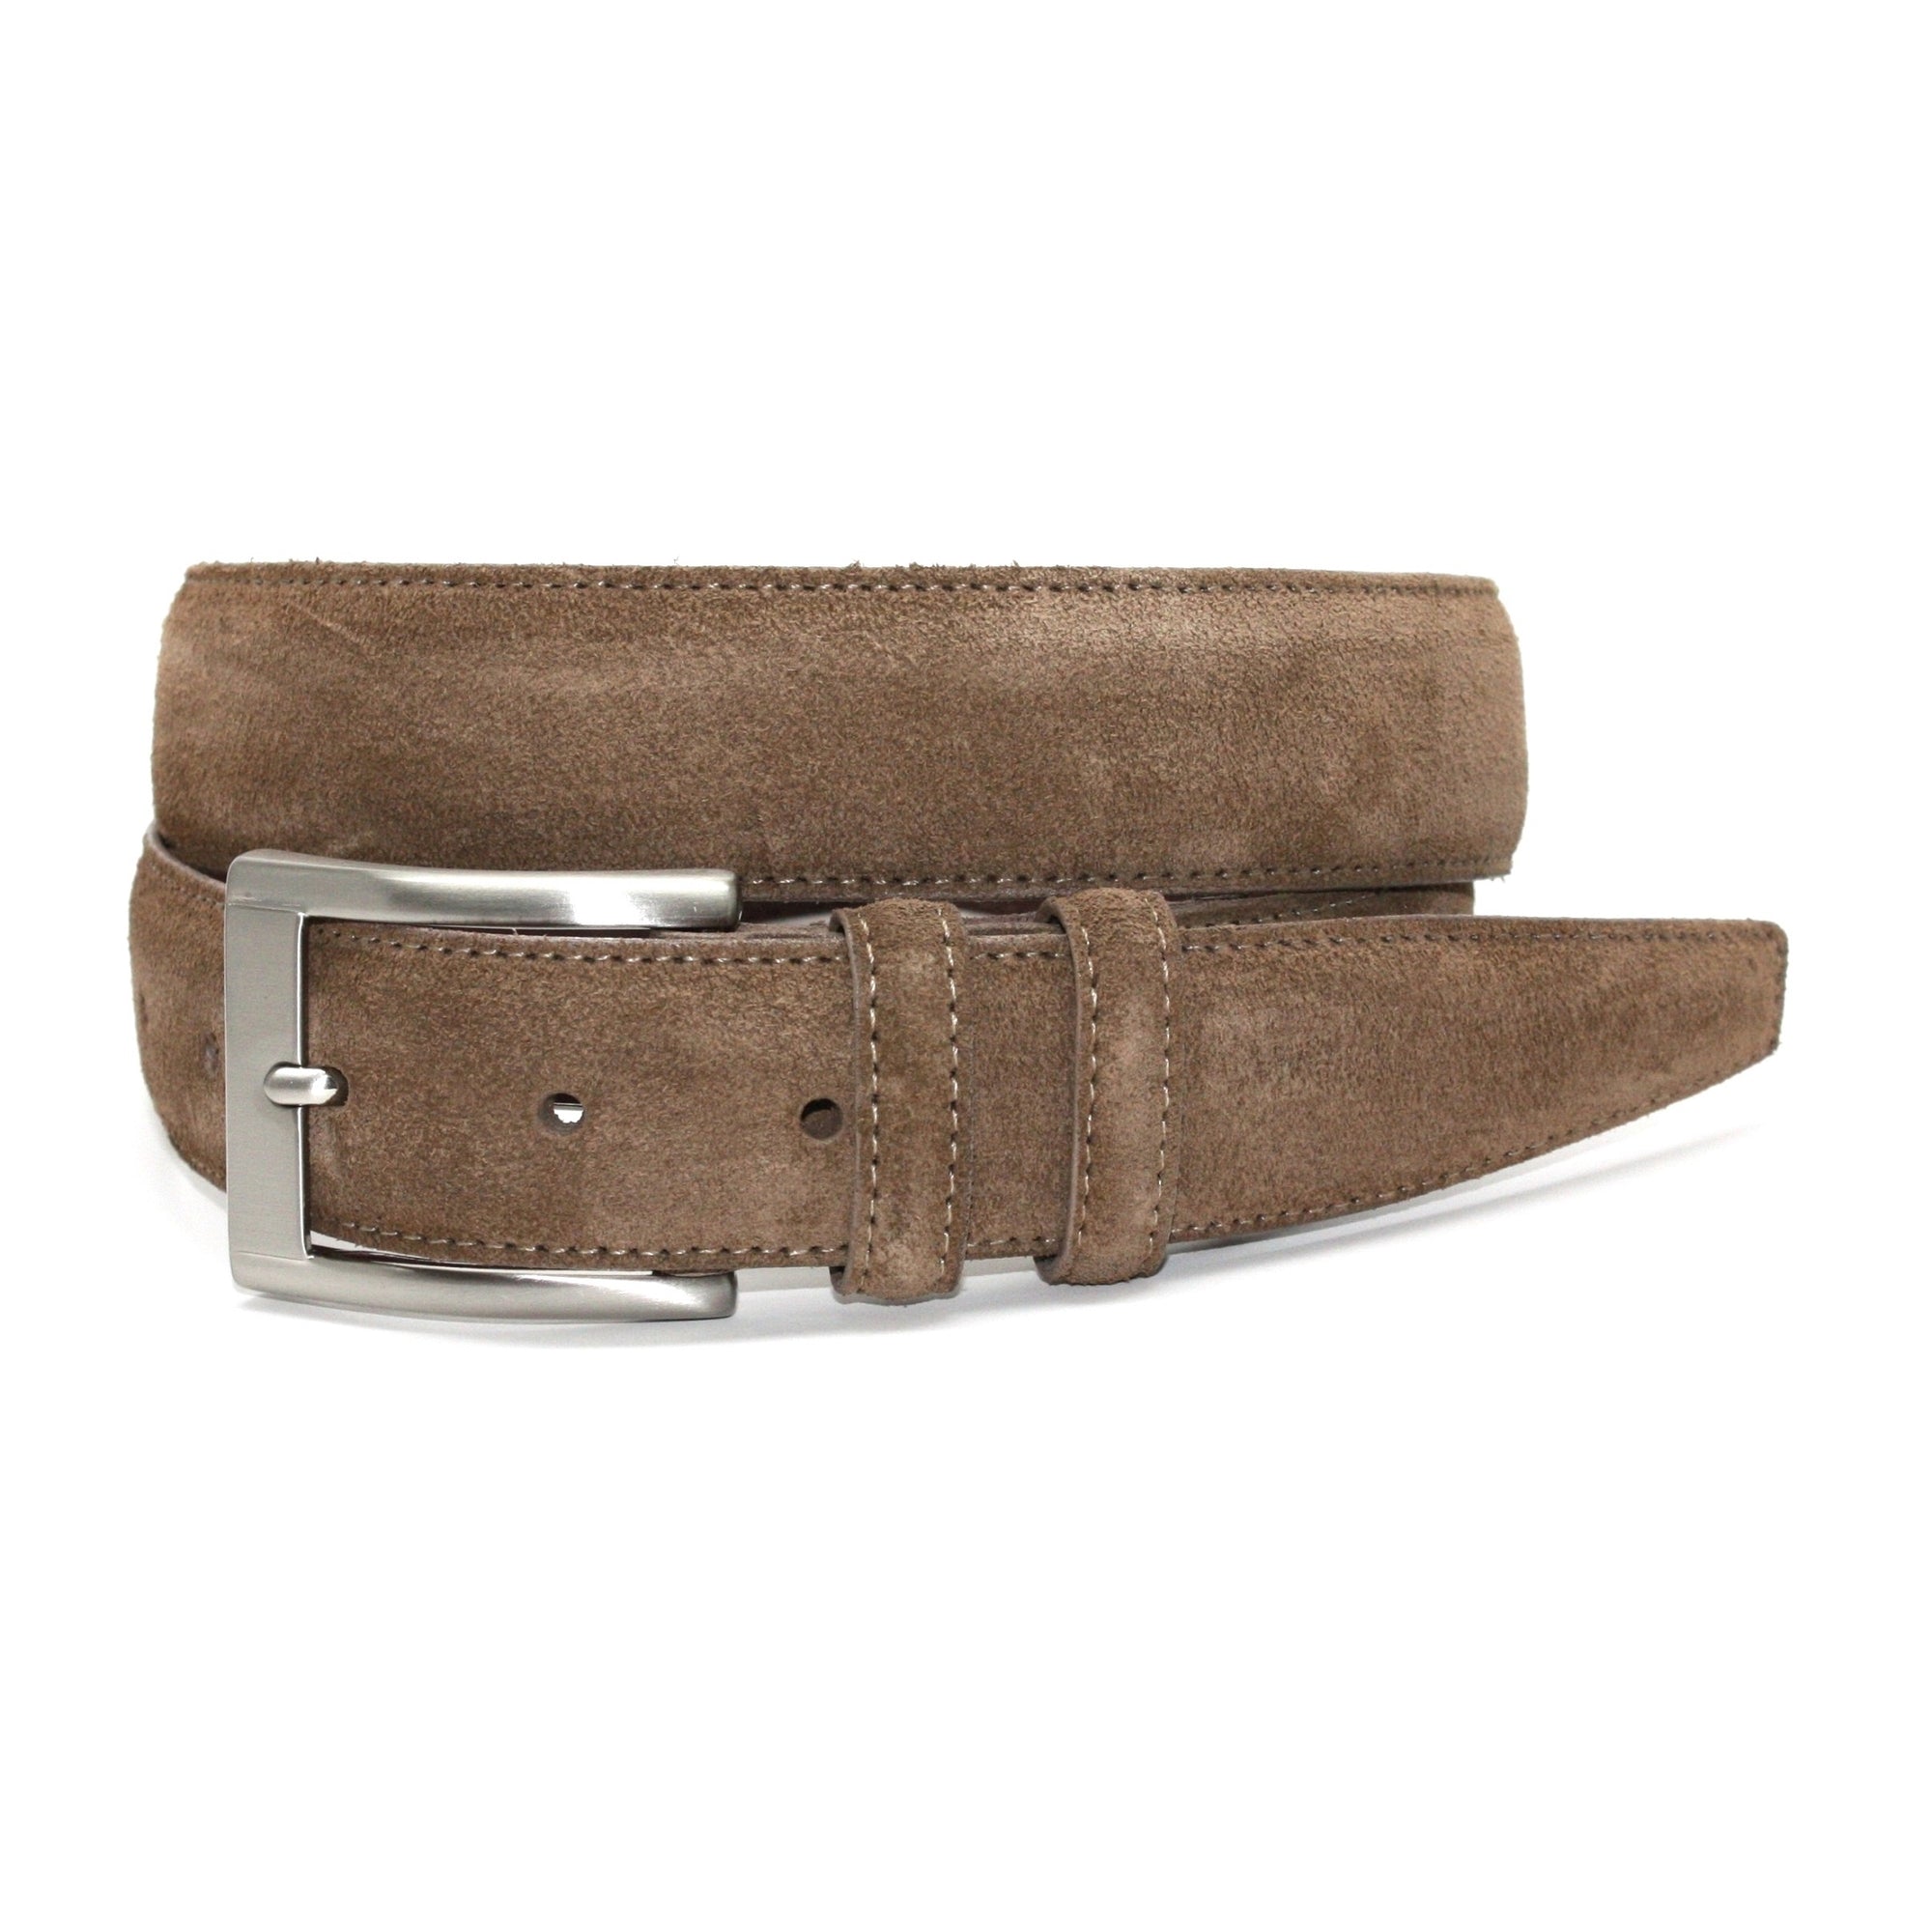 Italian Sueded Calfskin Belt in Whiskey by Torino Leather